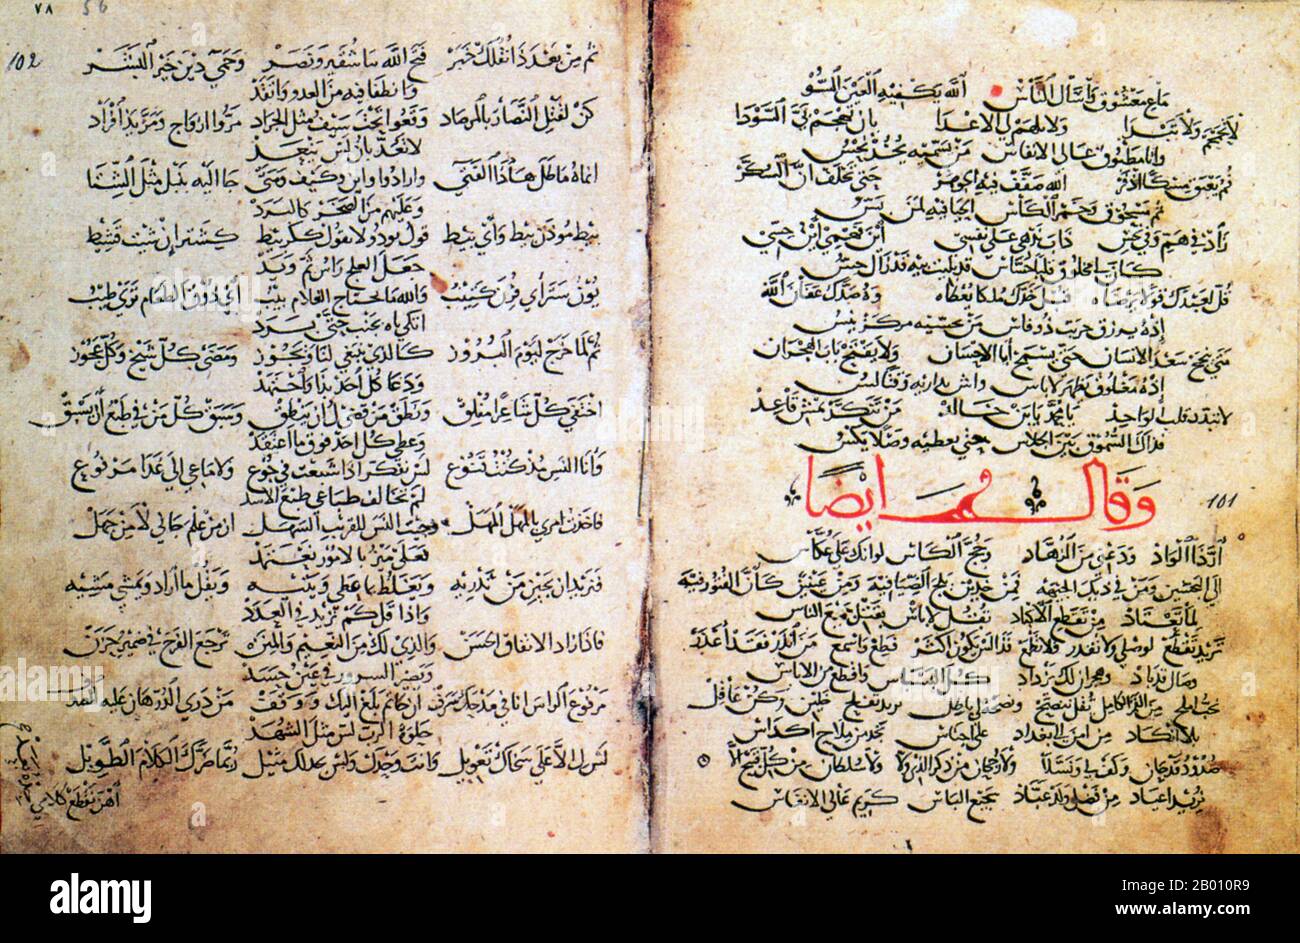 Spain/Syria: Pages from ‘A Guide to Achieving Goals’ a manuscript of 149 zejel, or poems, written by Ibn Quzman of Cordoba in Andalusian dialect script, and discovered in Syria in 1204 CE.  Muhammad ibn Abd al-Malik ibn Quzman (1078–1160 CE) was born and died in Cordoba. He is one of the most famous poets of al-Andalus and he is also considered to be one of its most original. He is the author of classical poetry, but above all of zejels. Stock Photo